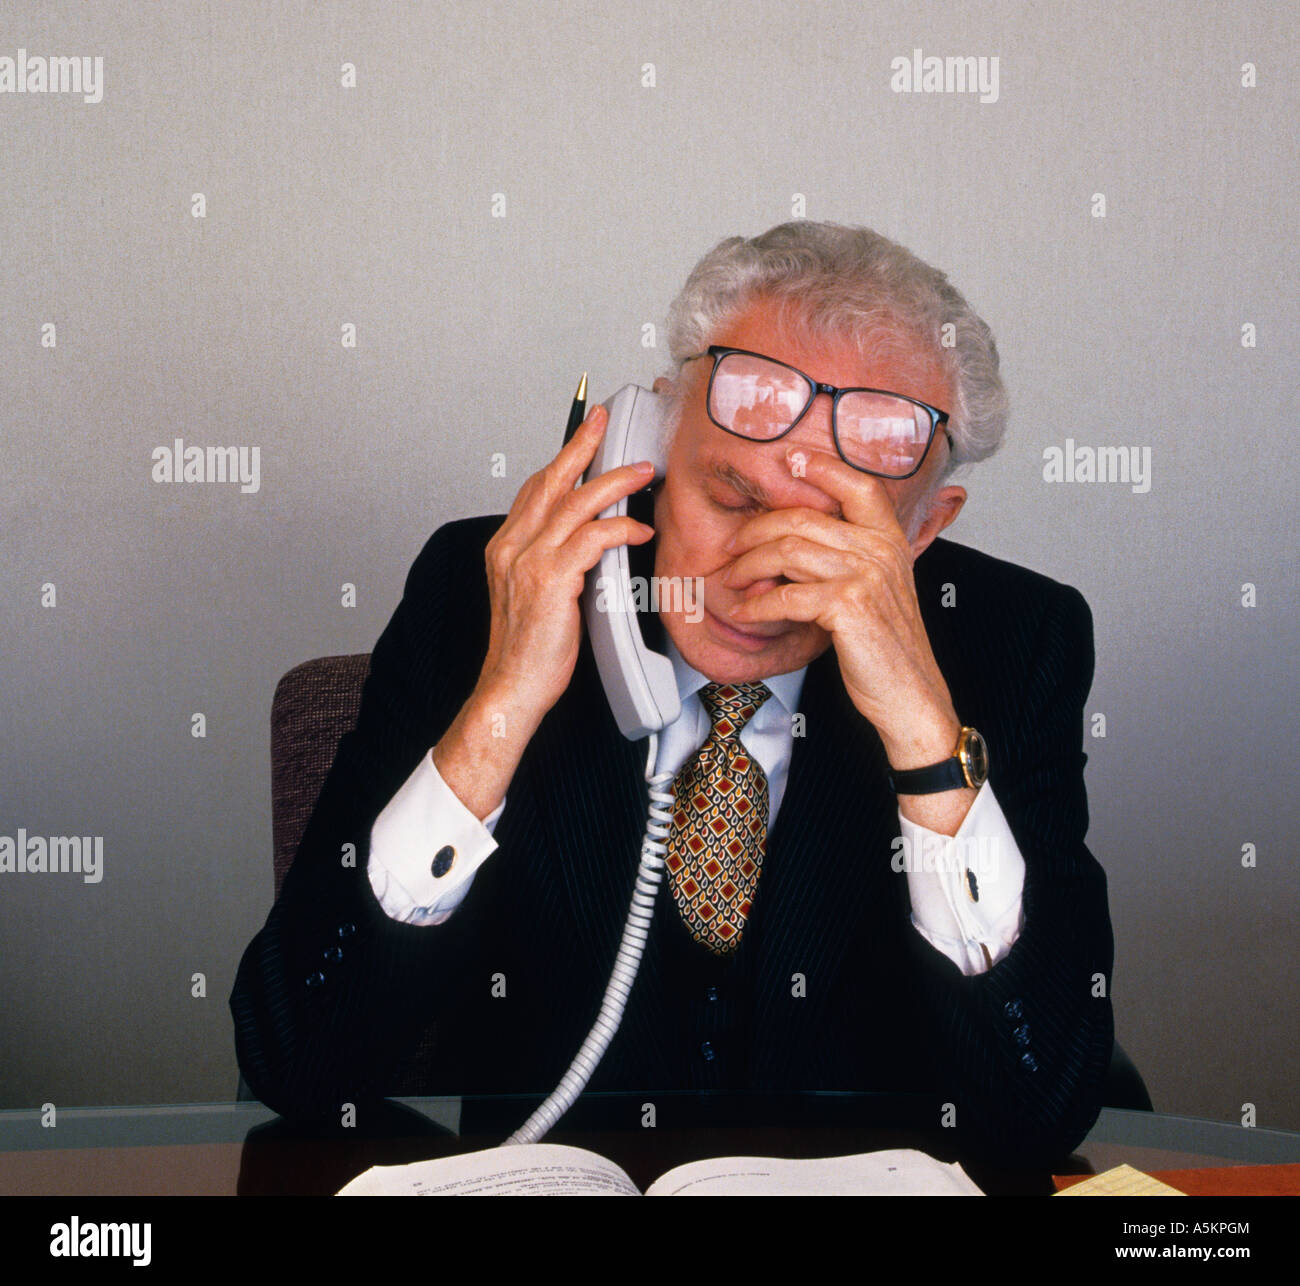 Elderly Man On the Phone in His Office Sitting At His Desk Concerned Tired and Overworked Stock Photo